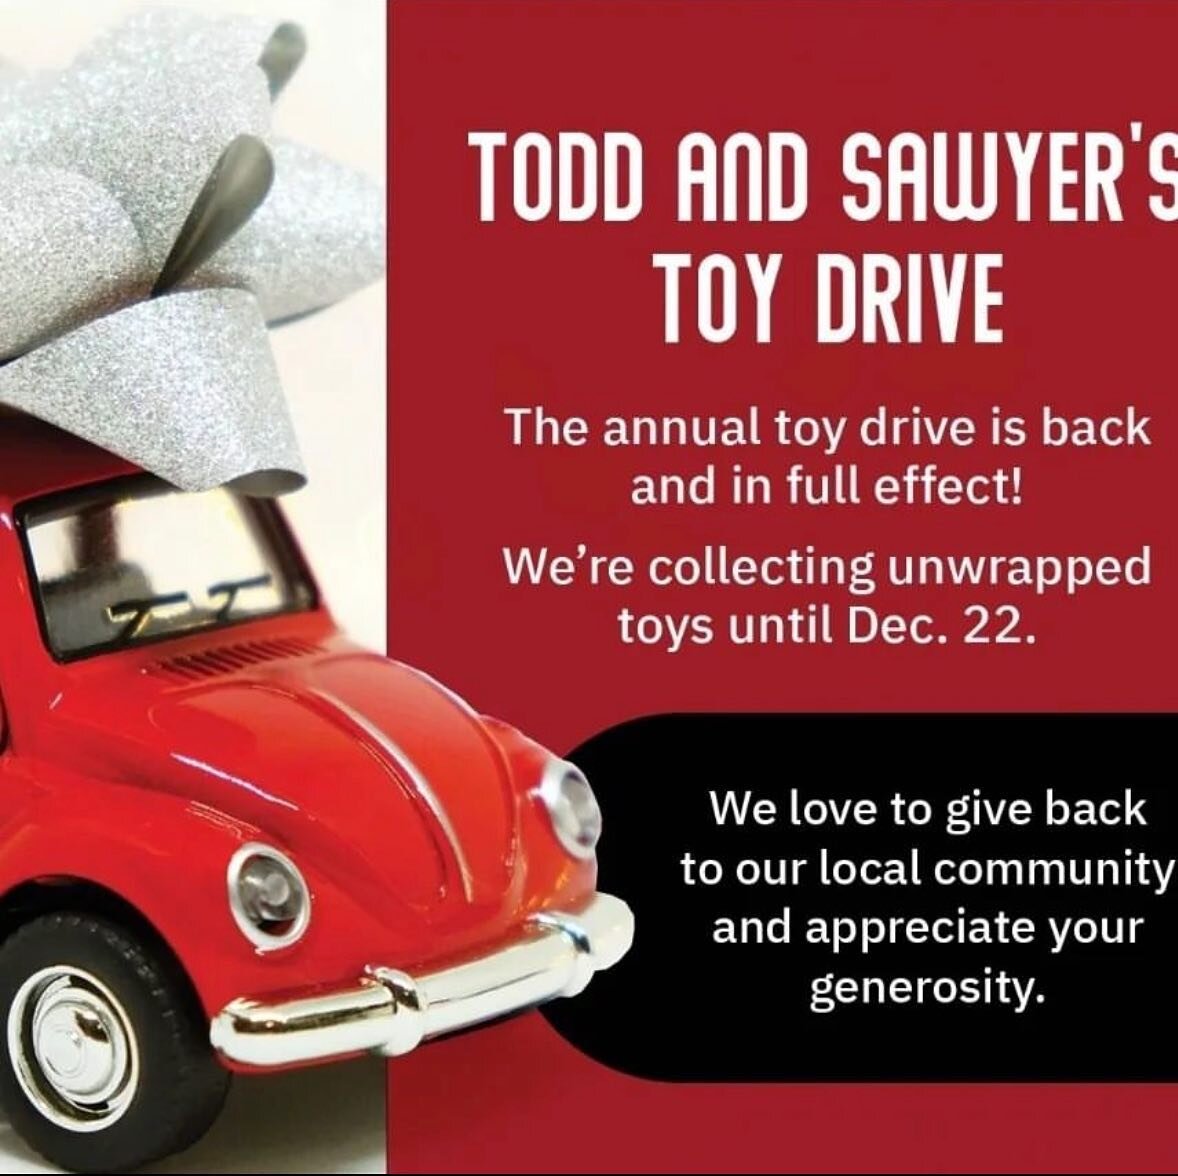 Todd and sawyer&rsquo;s toy drive. It means so much when you support Steve&rsquo;s charity. Drop off toys for local children.